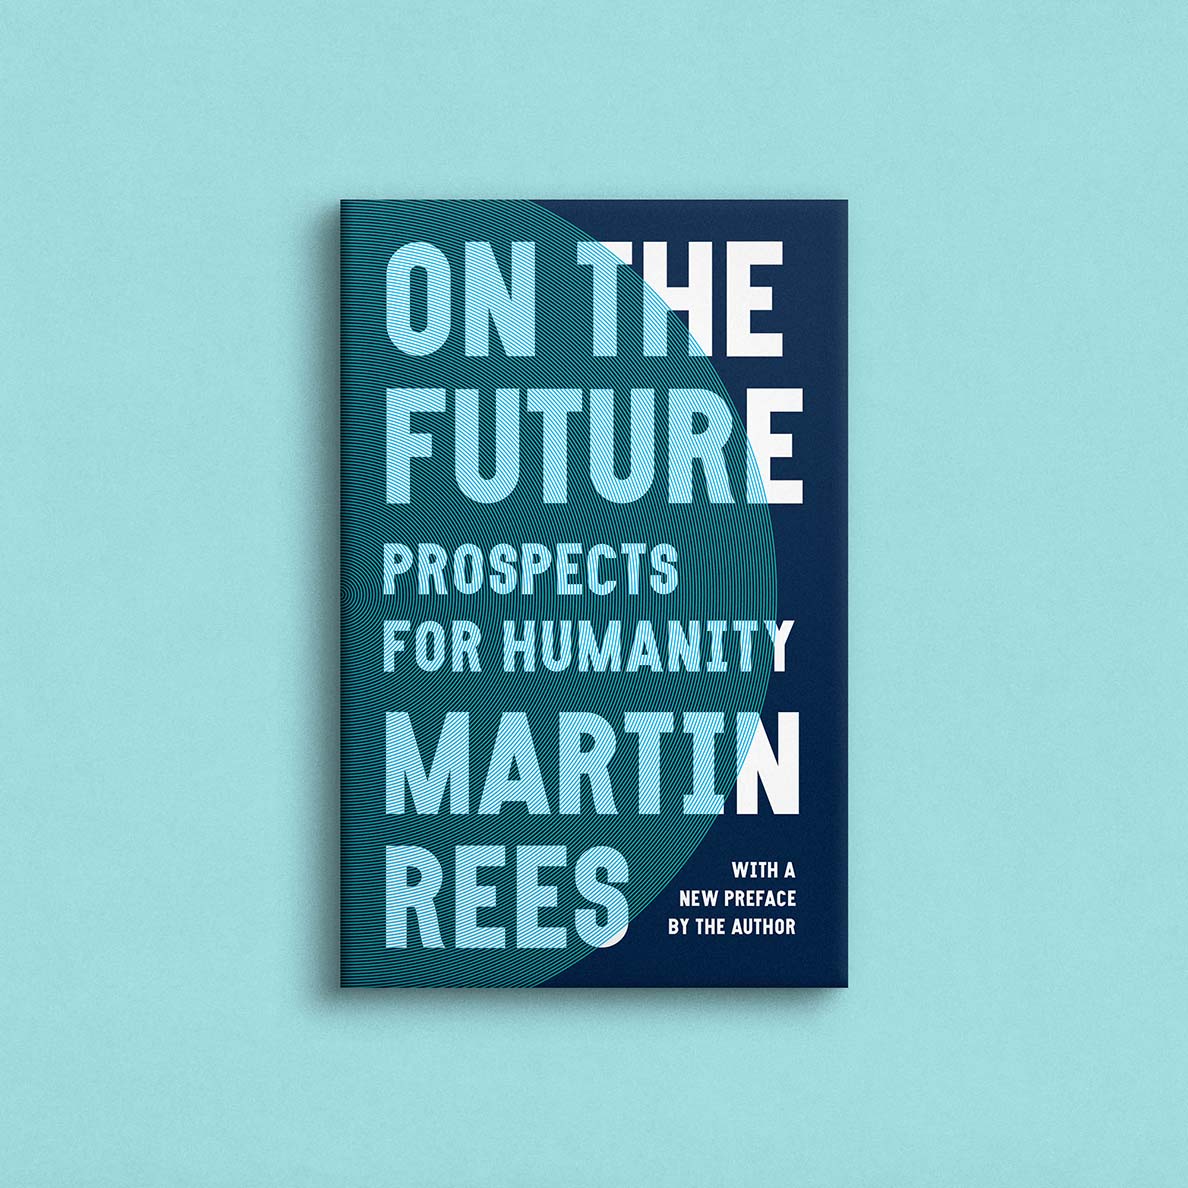 On the Future book cover